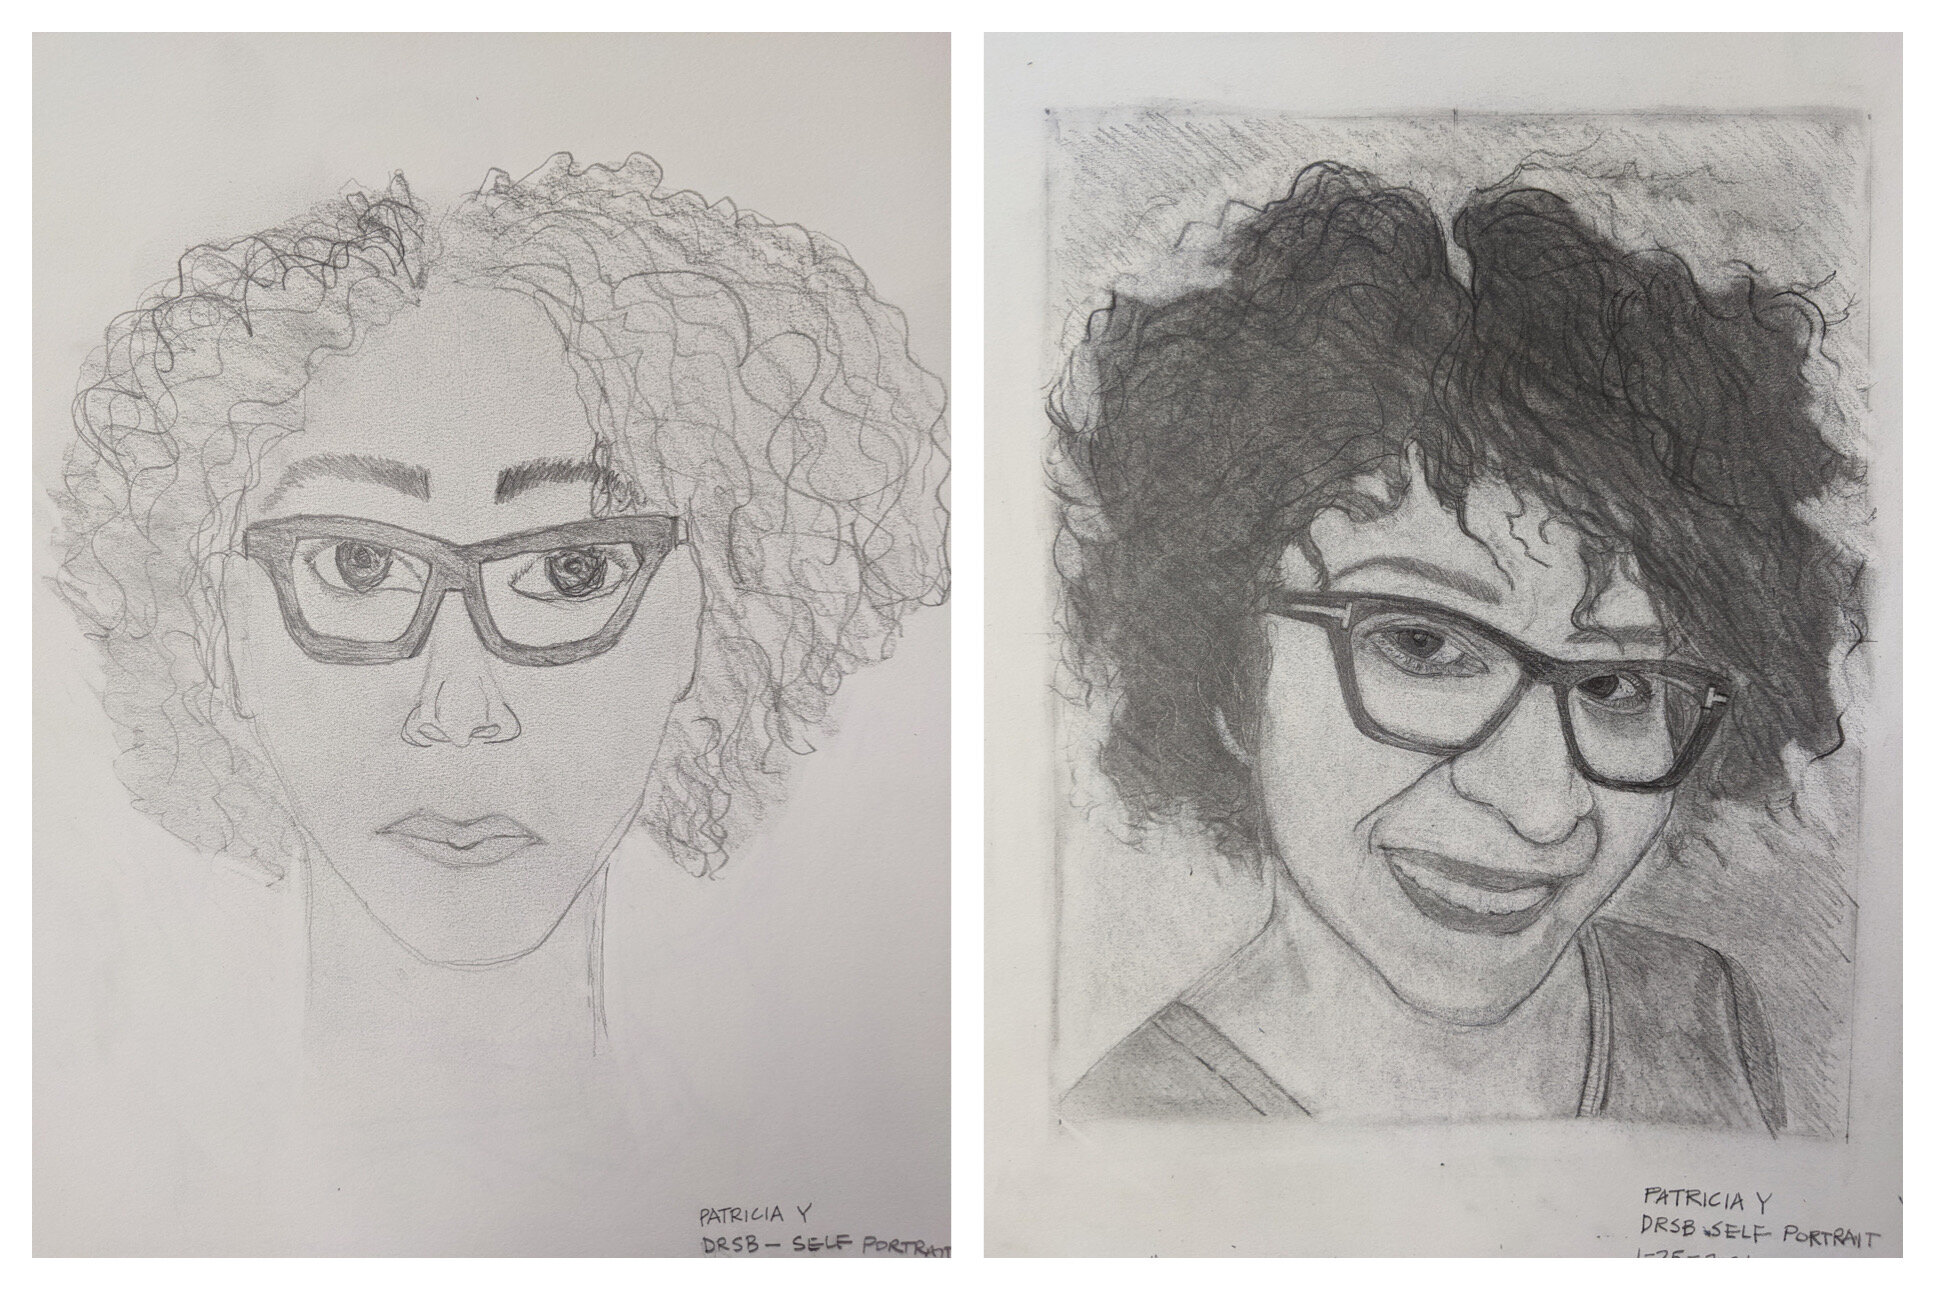 Patricia's Before and After Drawings